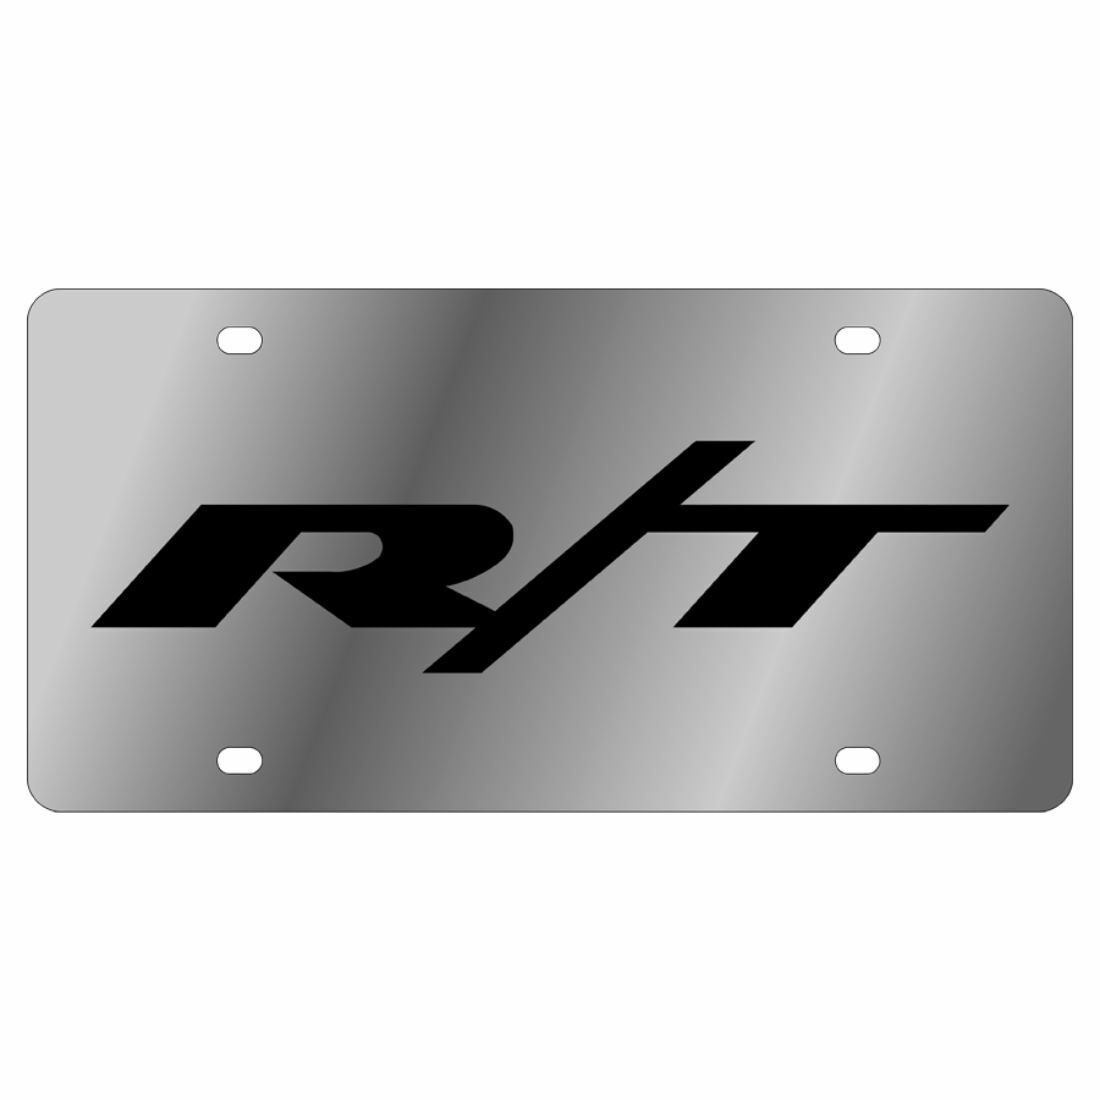 Stainless Steel Plate R T Logo Black License Plate Frame 3D Novelty Tag